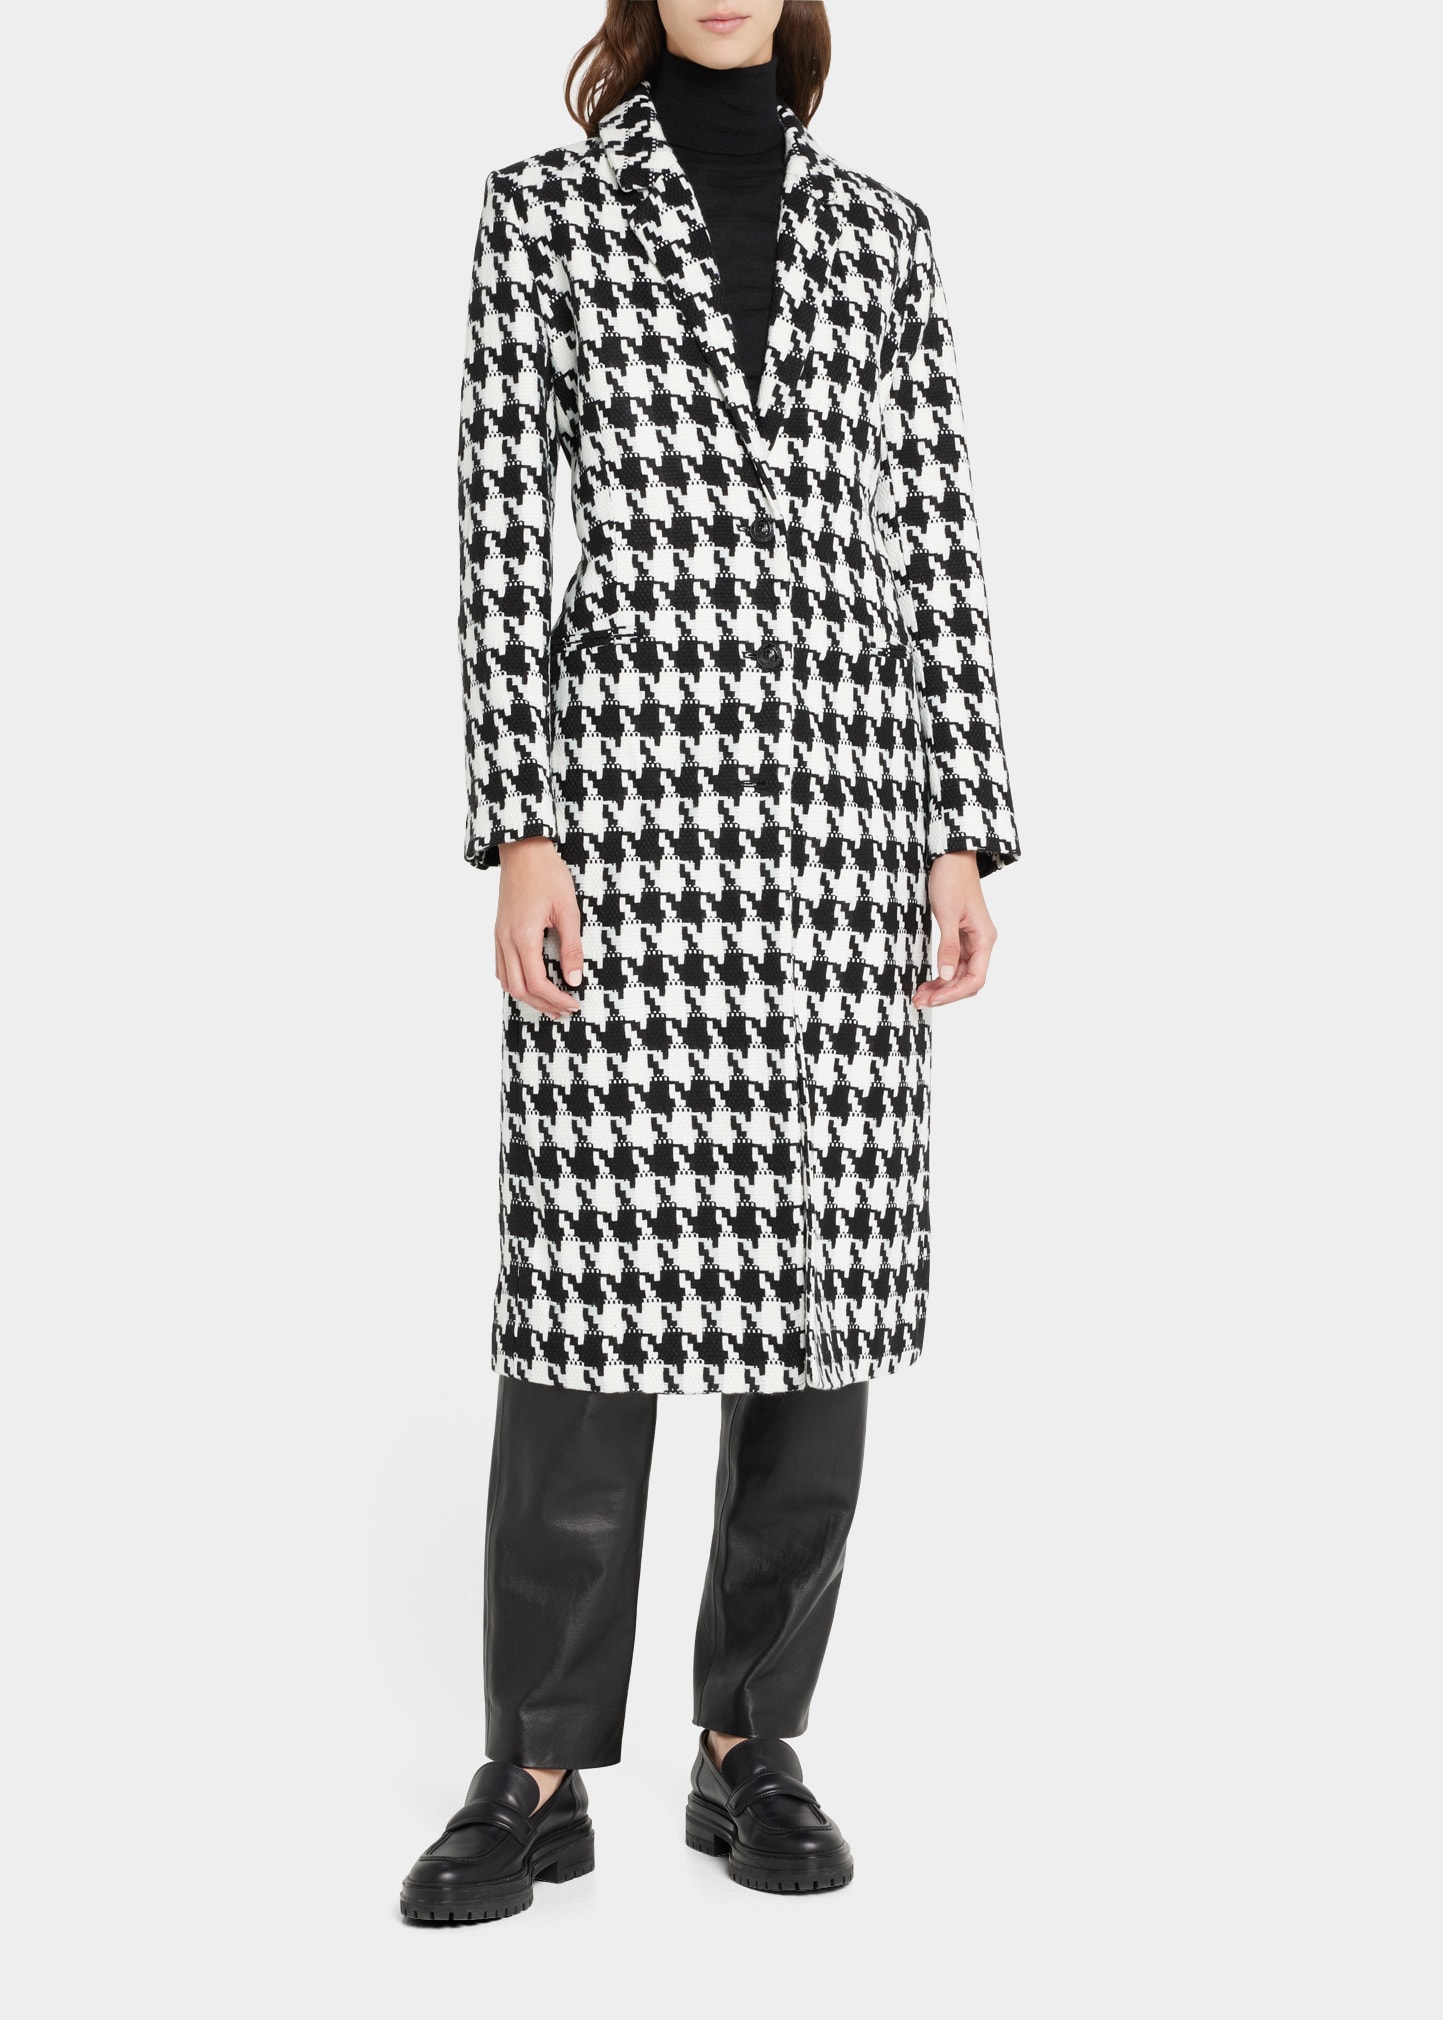 Xander Single-Breasted Houndstooth Coat